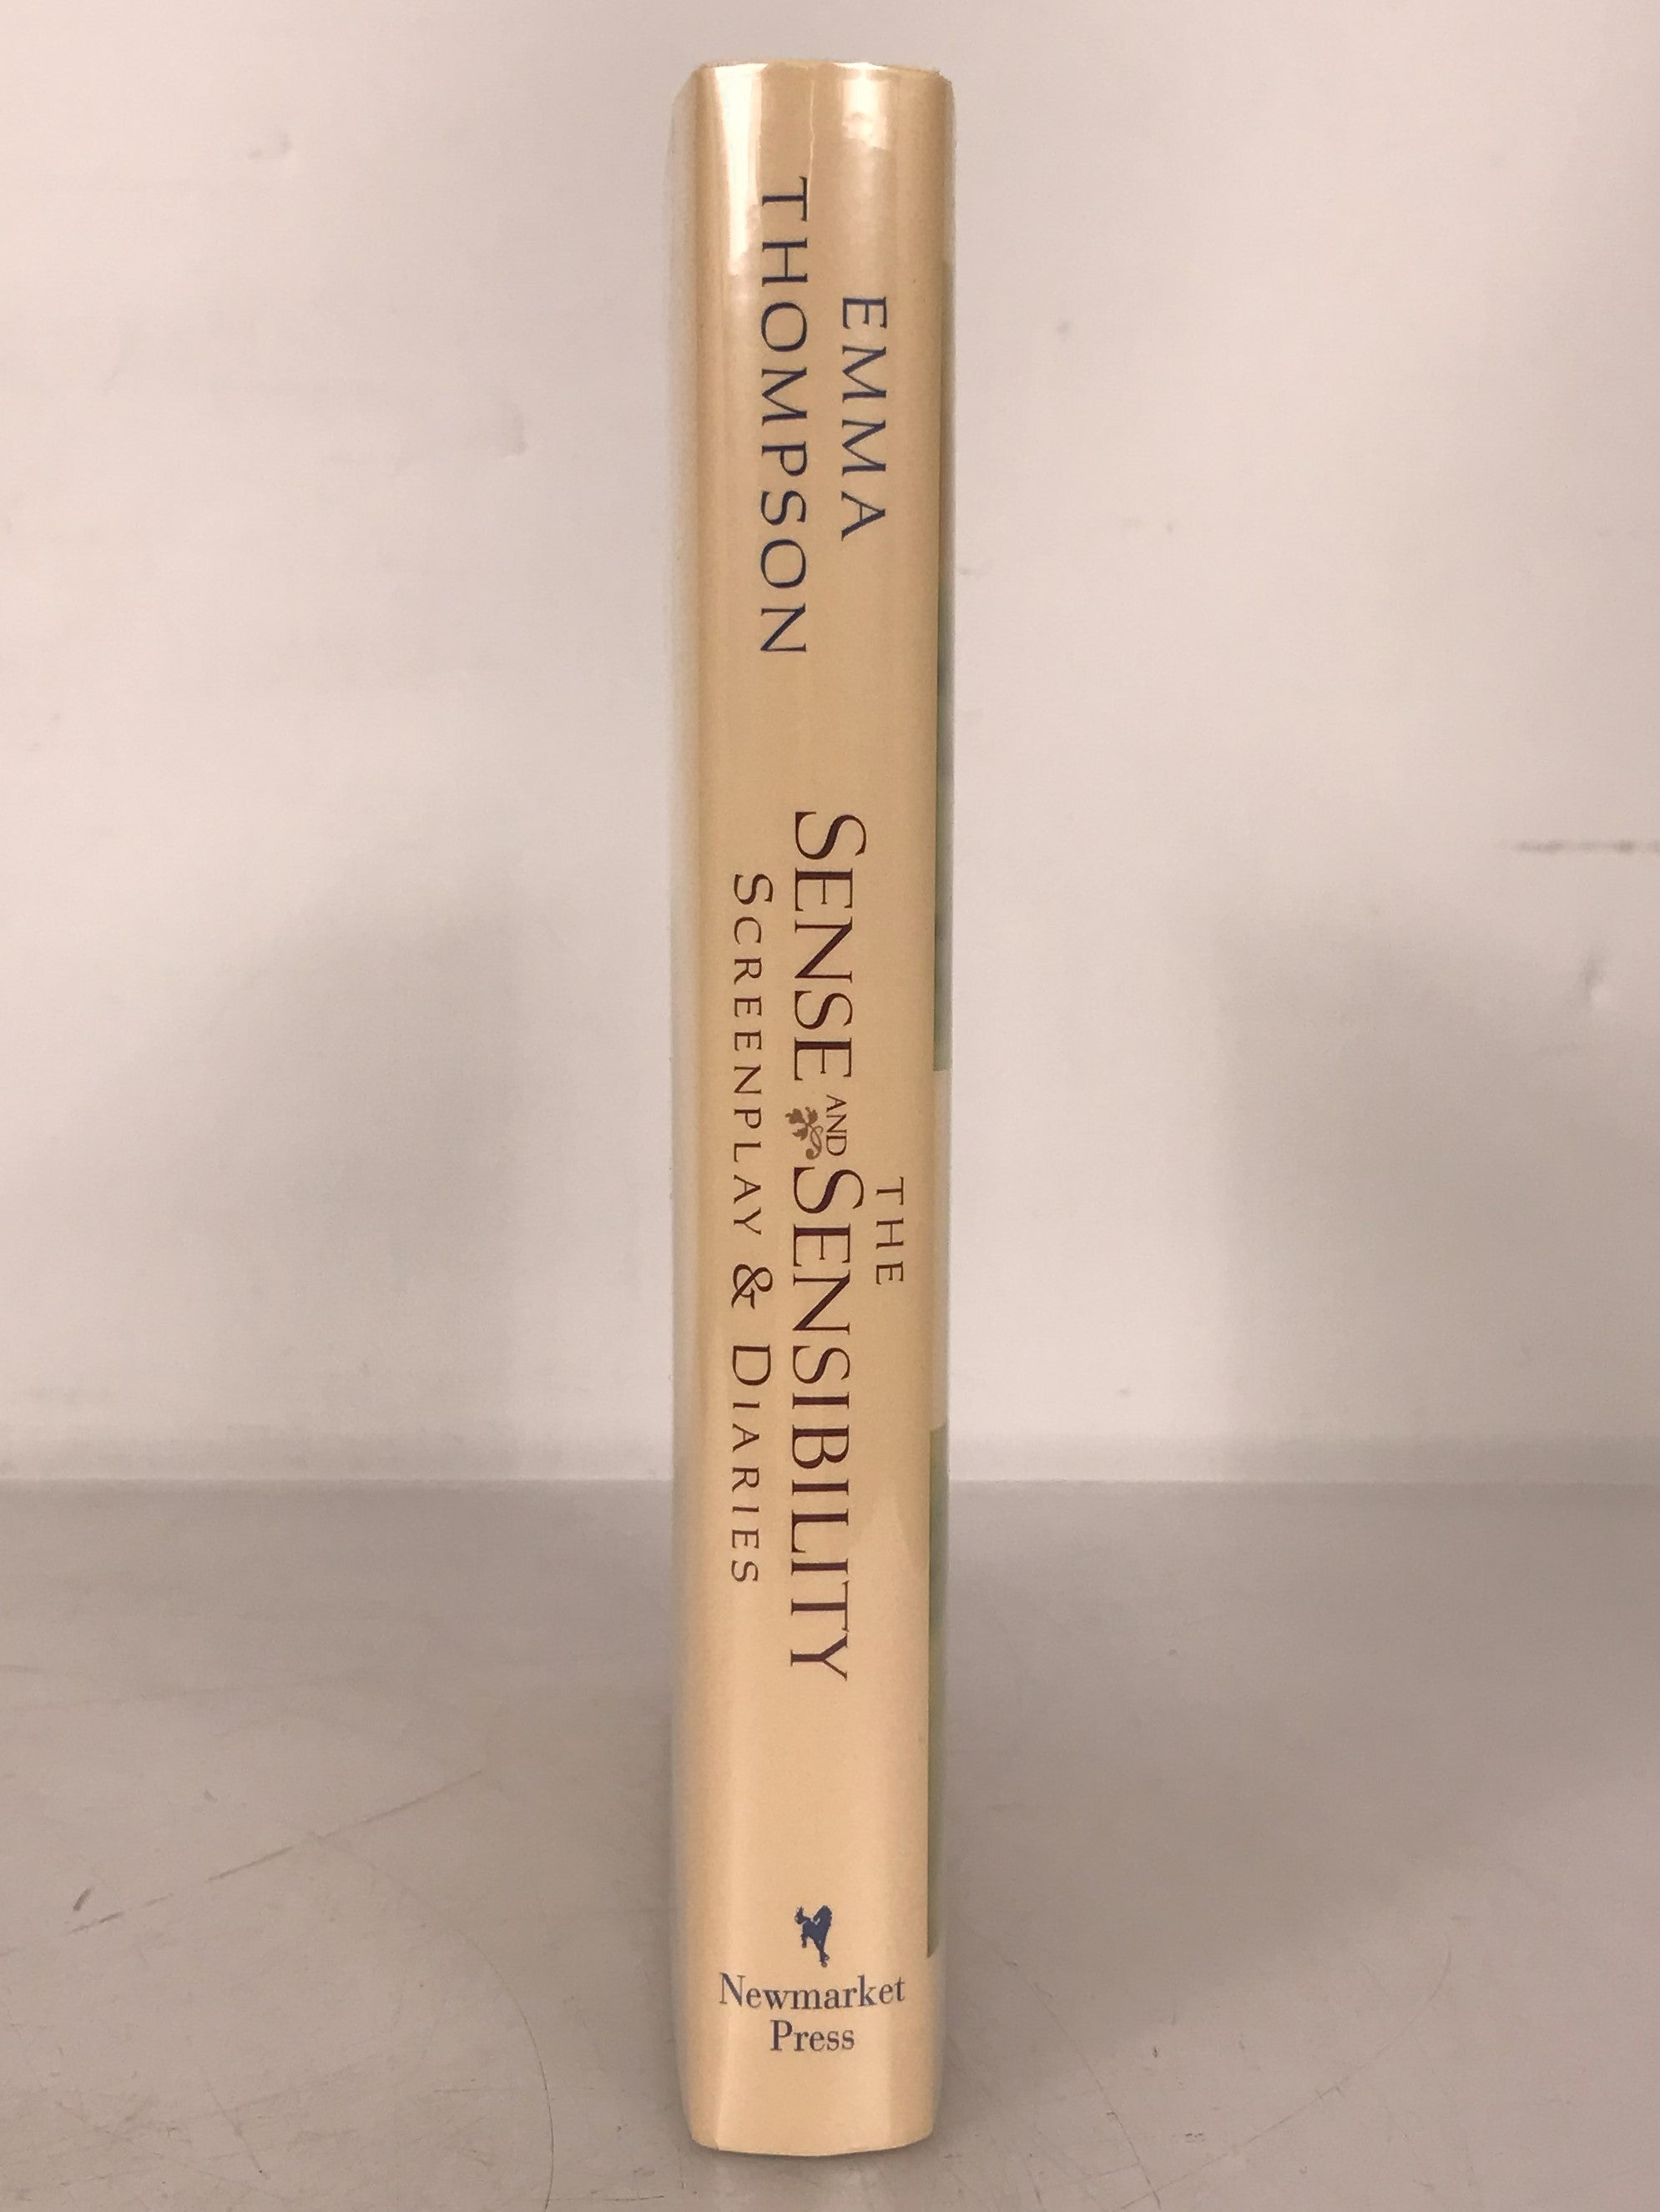 The Sense and Sensibility Screenplay & Diaries by Emma Thompson Signed 1995